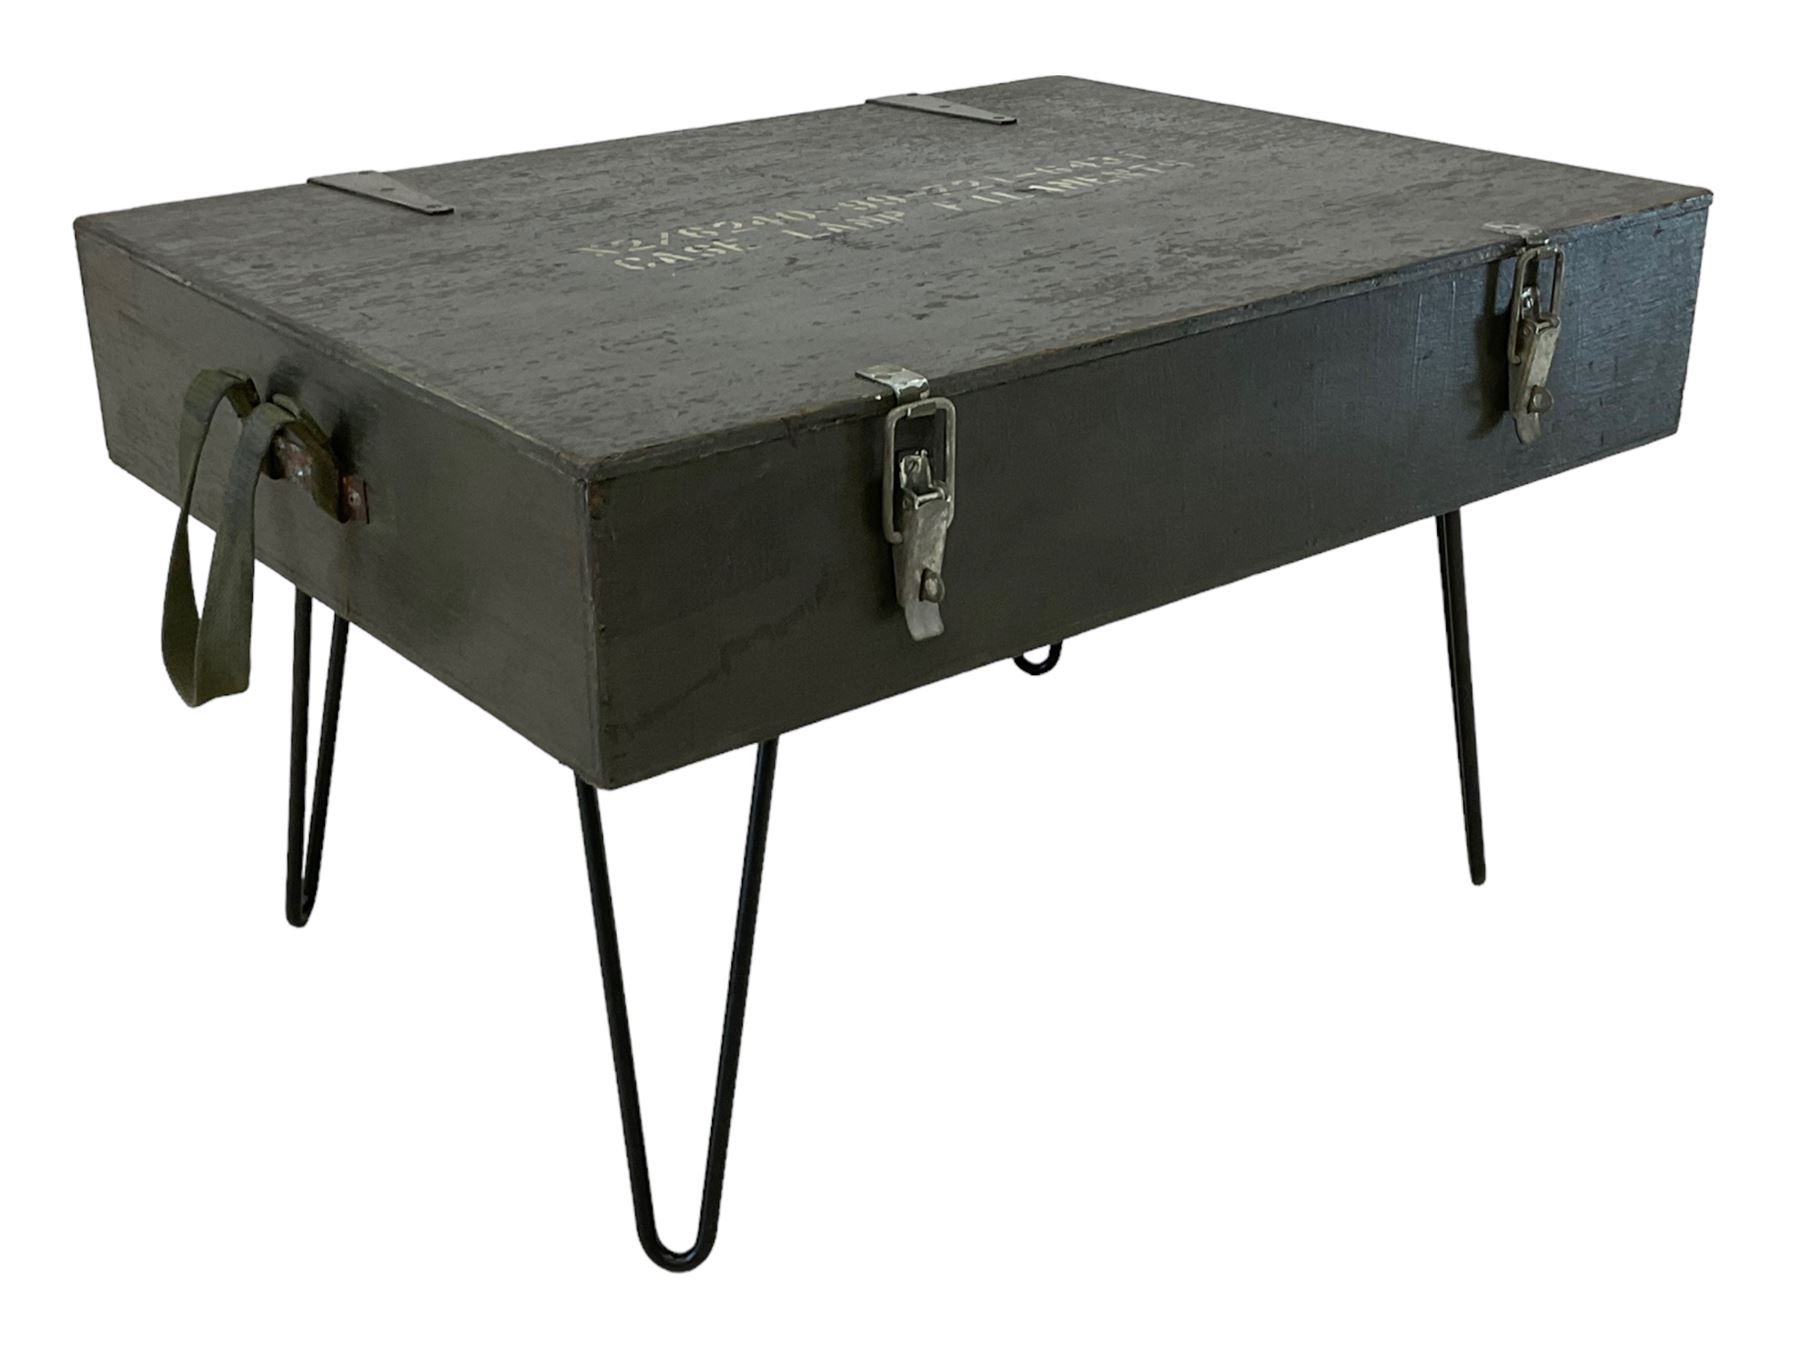 Ex-military green painted wooden coffee table